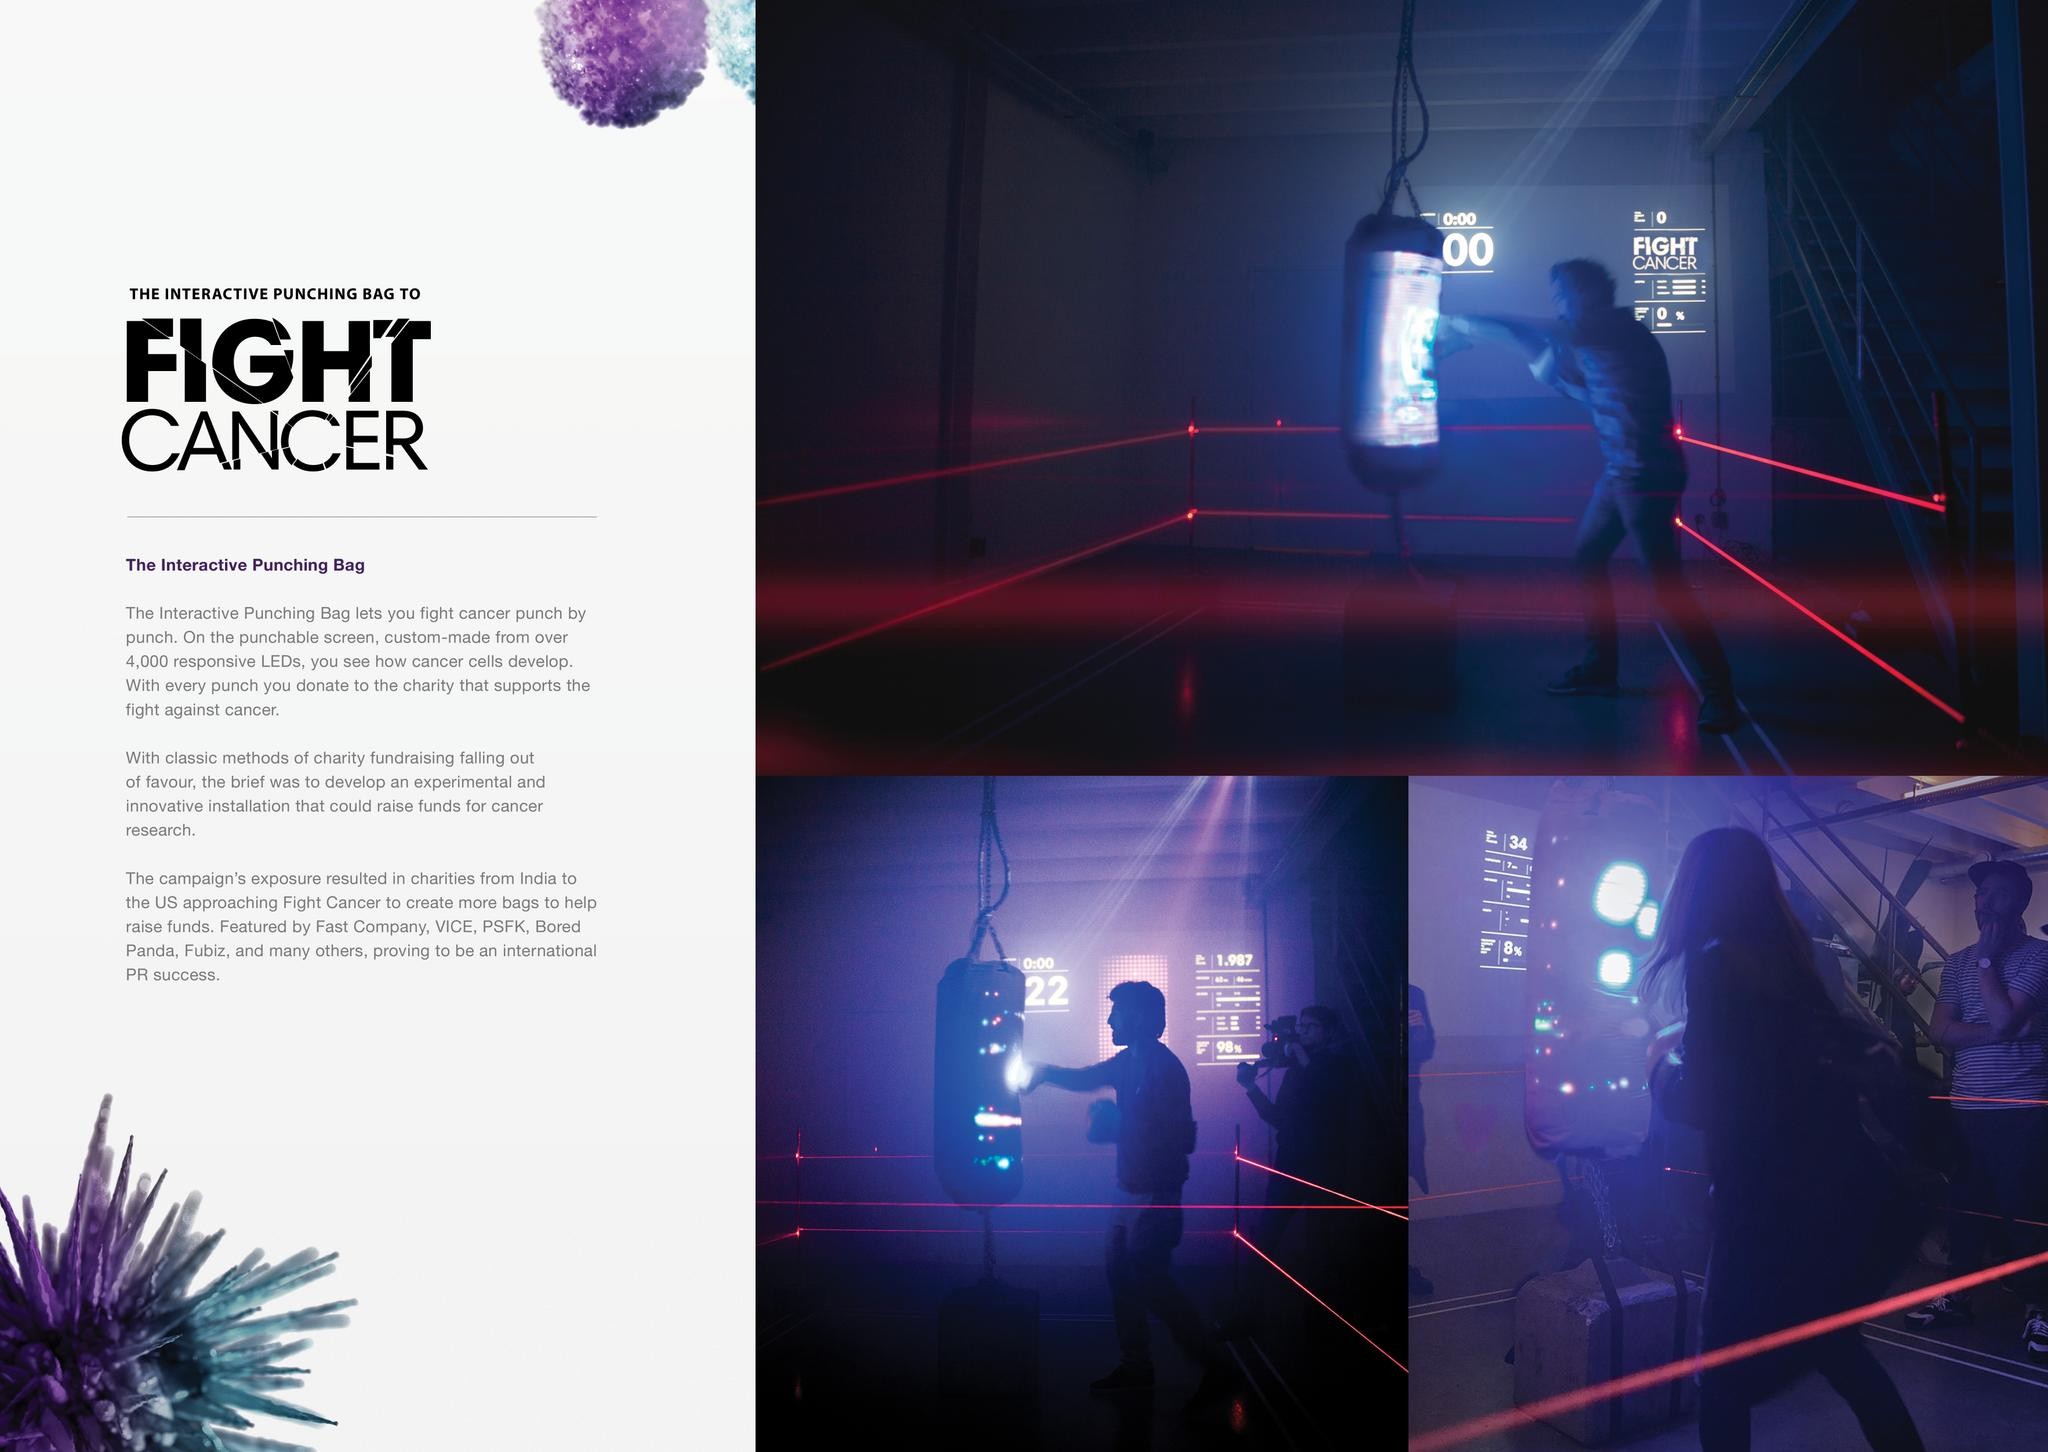 Fight Cancer: The Interactive Punching Bag